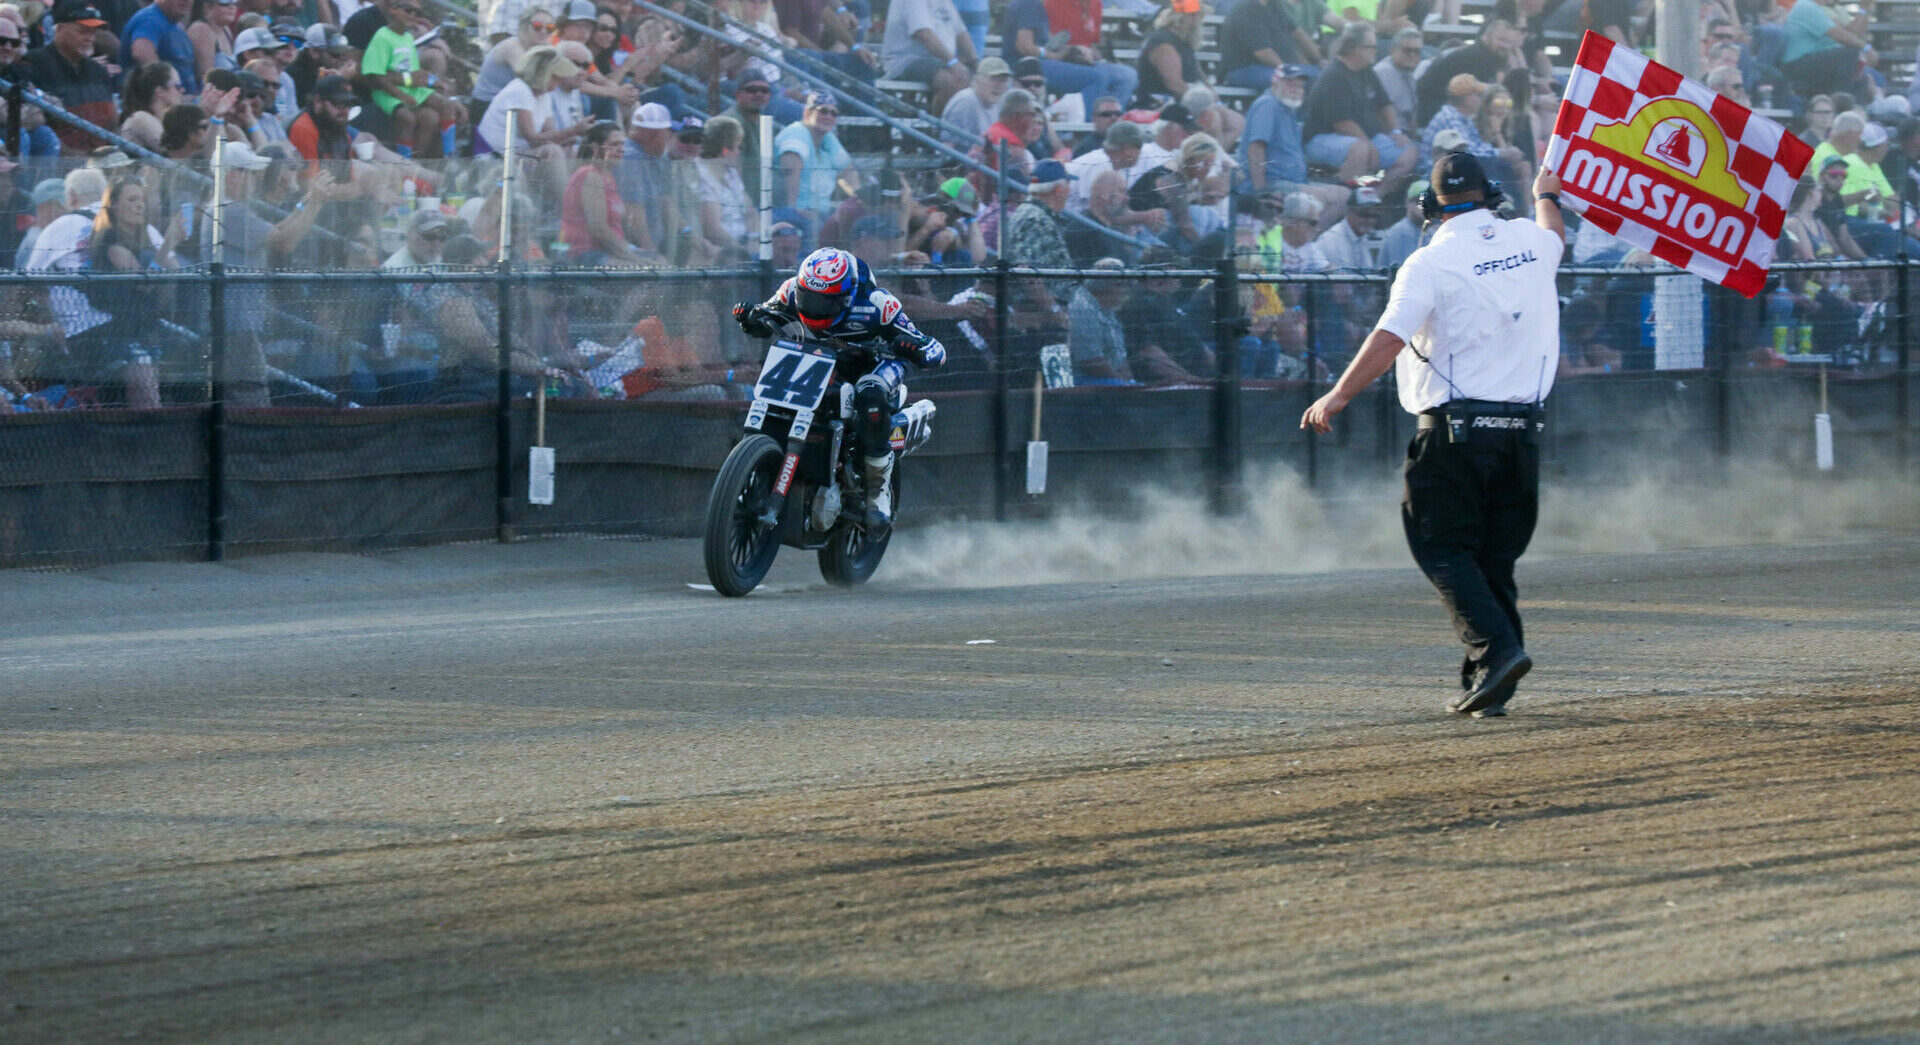 Brandon Robinson (44) takes a Mission-branded checkered flag at an AFT event in 2021. Photo courtesy AFT.